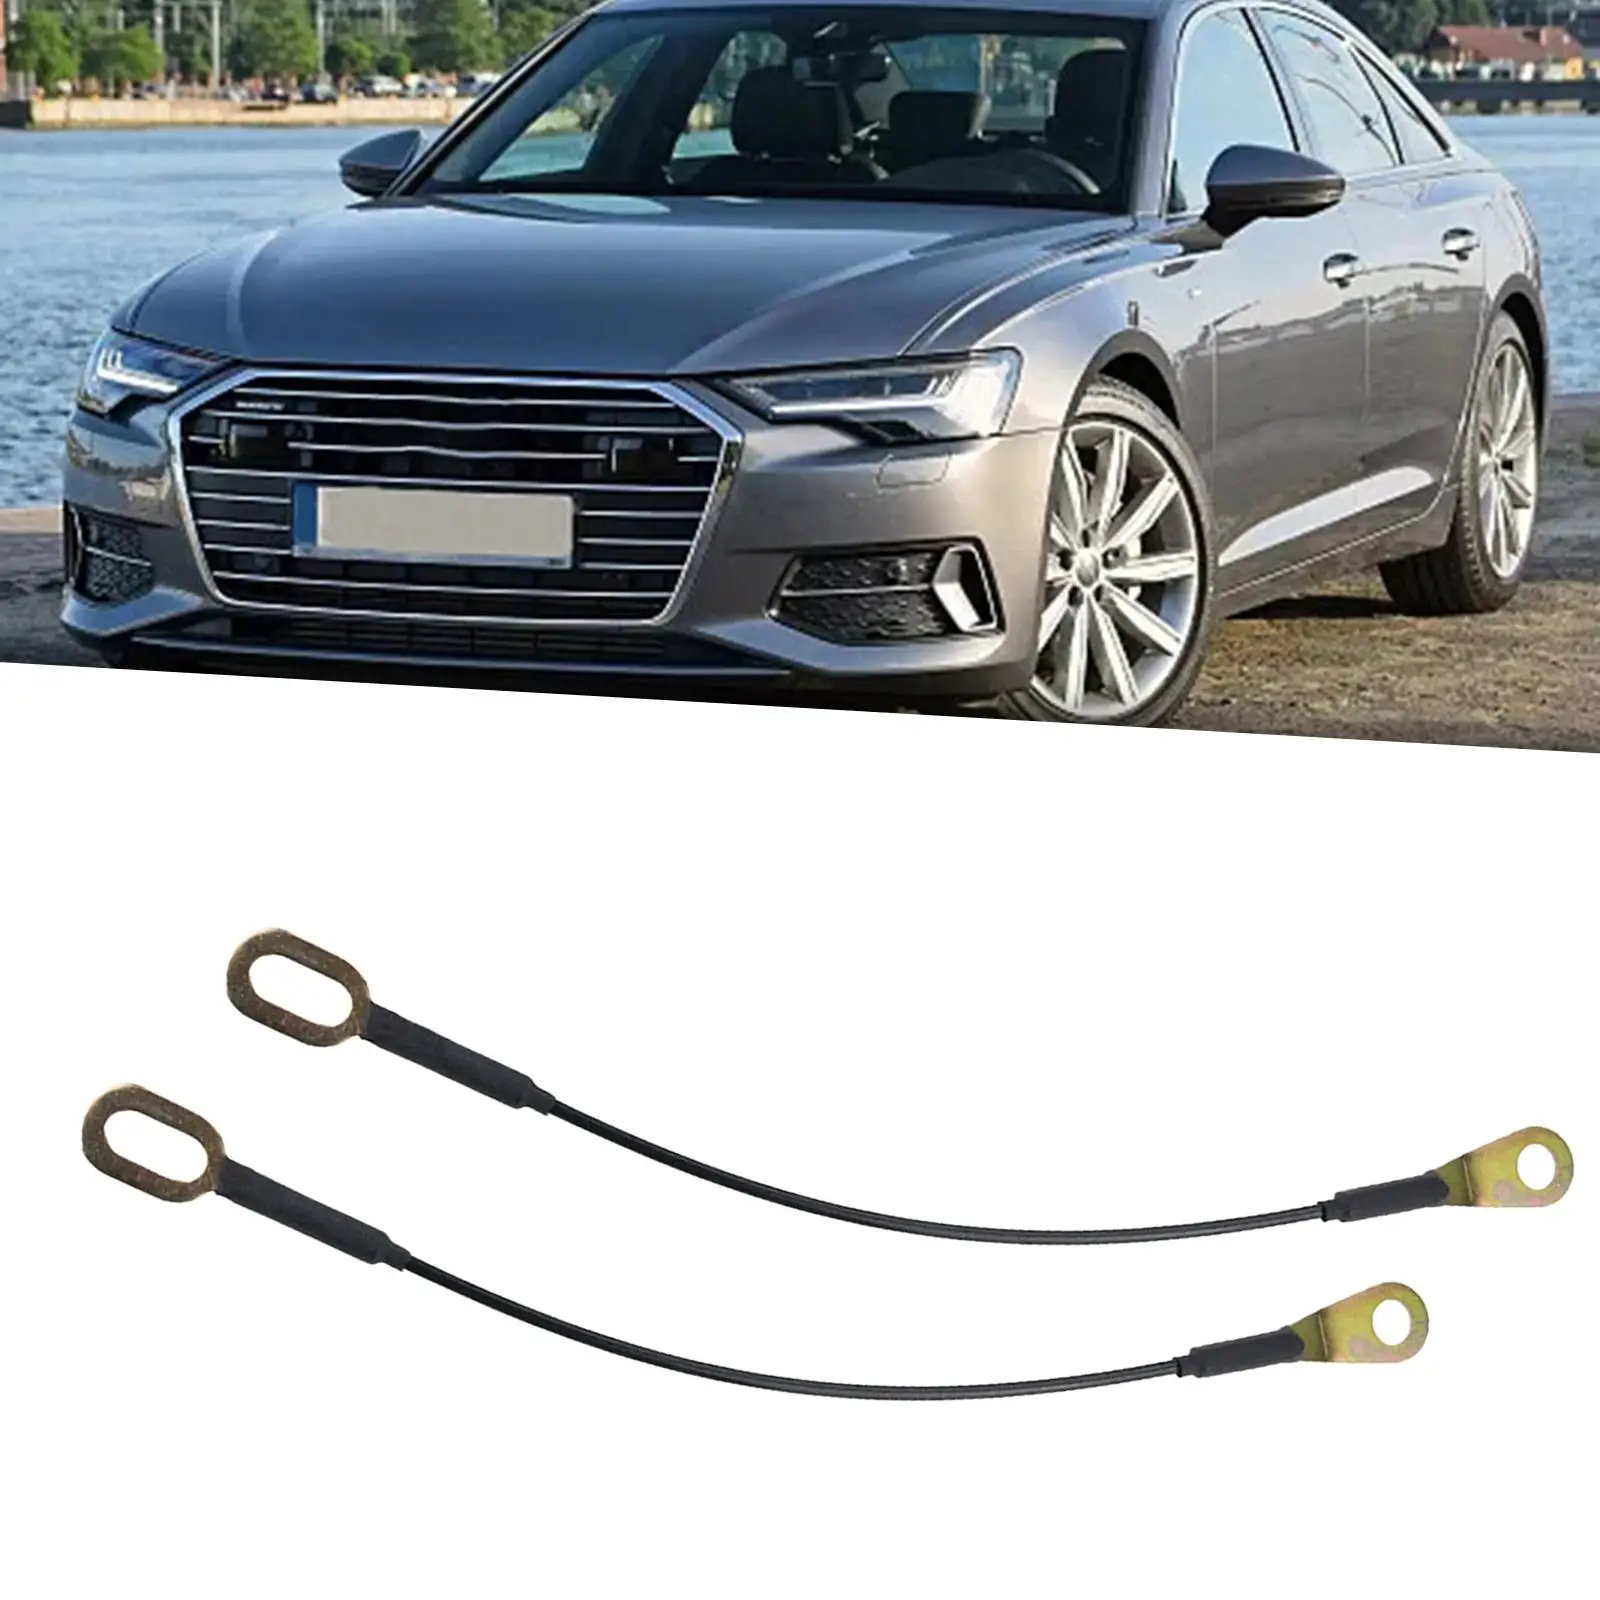 1 Pair Rear Tailgate Cable UH70-65-760 Length 15inch Tail Gate Cord replacements for Ford Thunderbird 2011-2019 Professional